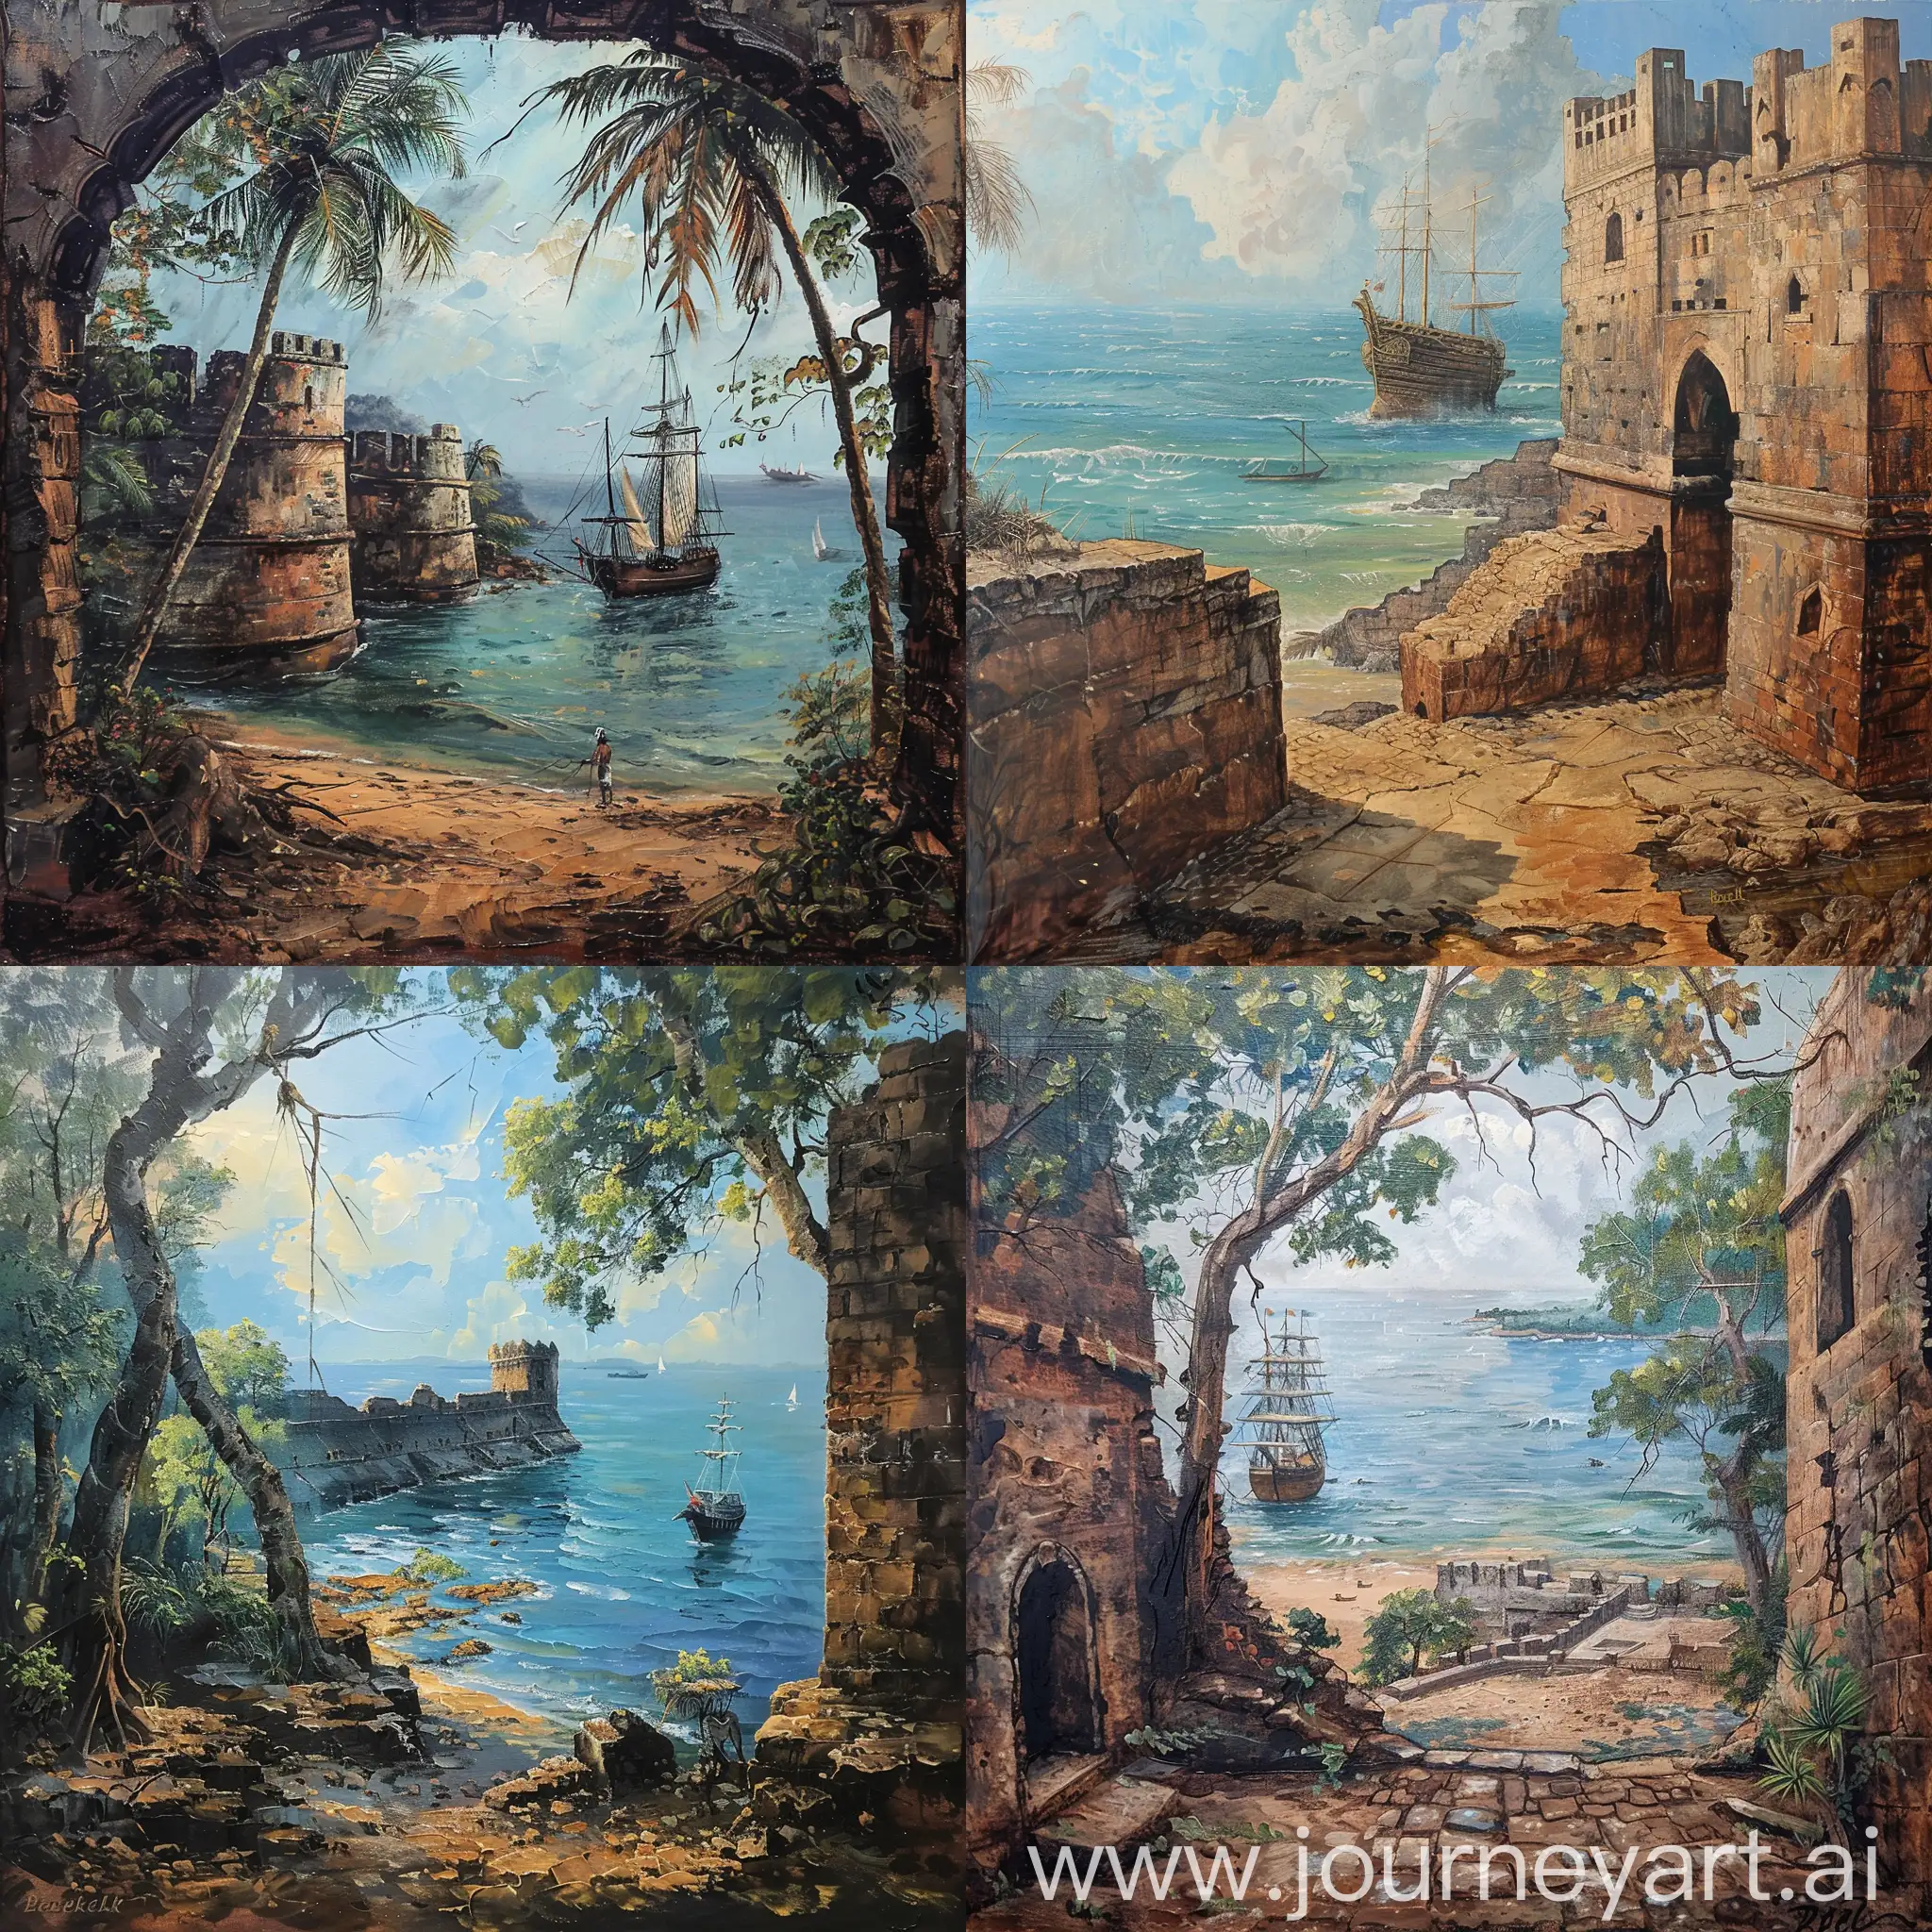 Painting of ancient famous fort of bekel, kasaragod in Kerala, use familiar portion of bekel fort facing to the sea, ancient ship should be there on the sea bank, the total frame shoud look like an old water painting